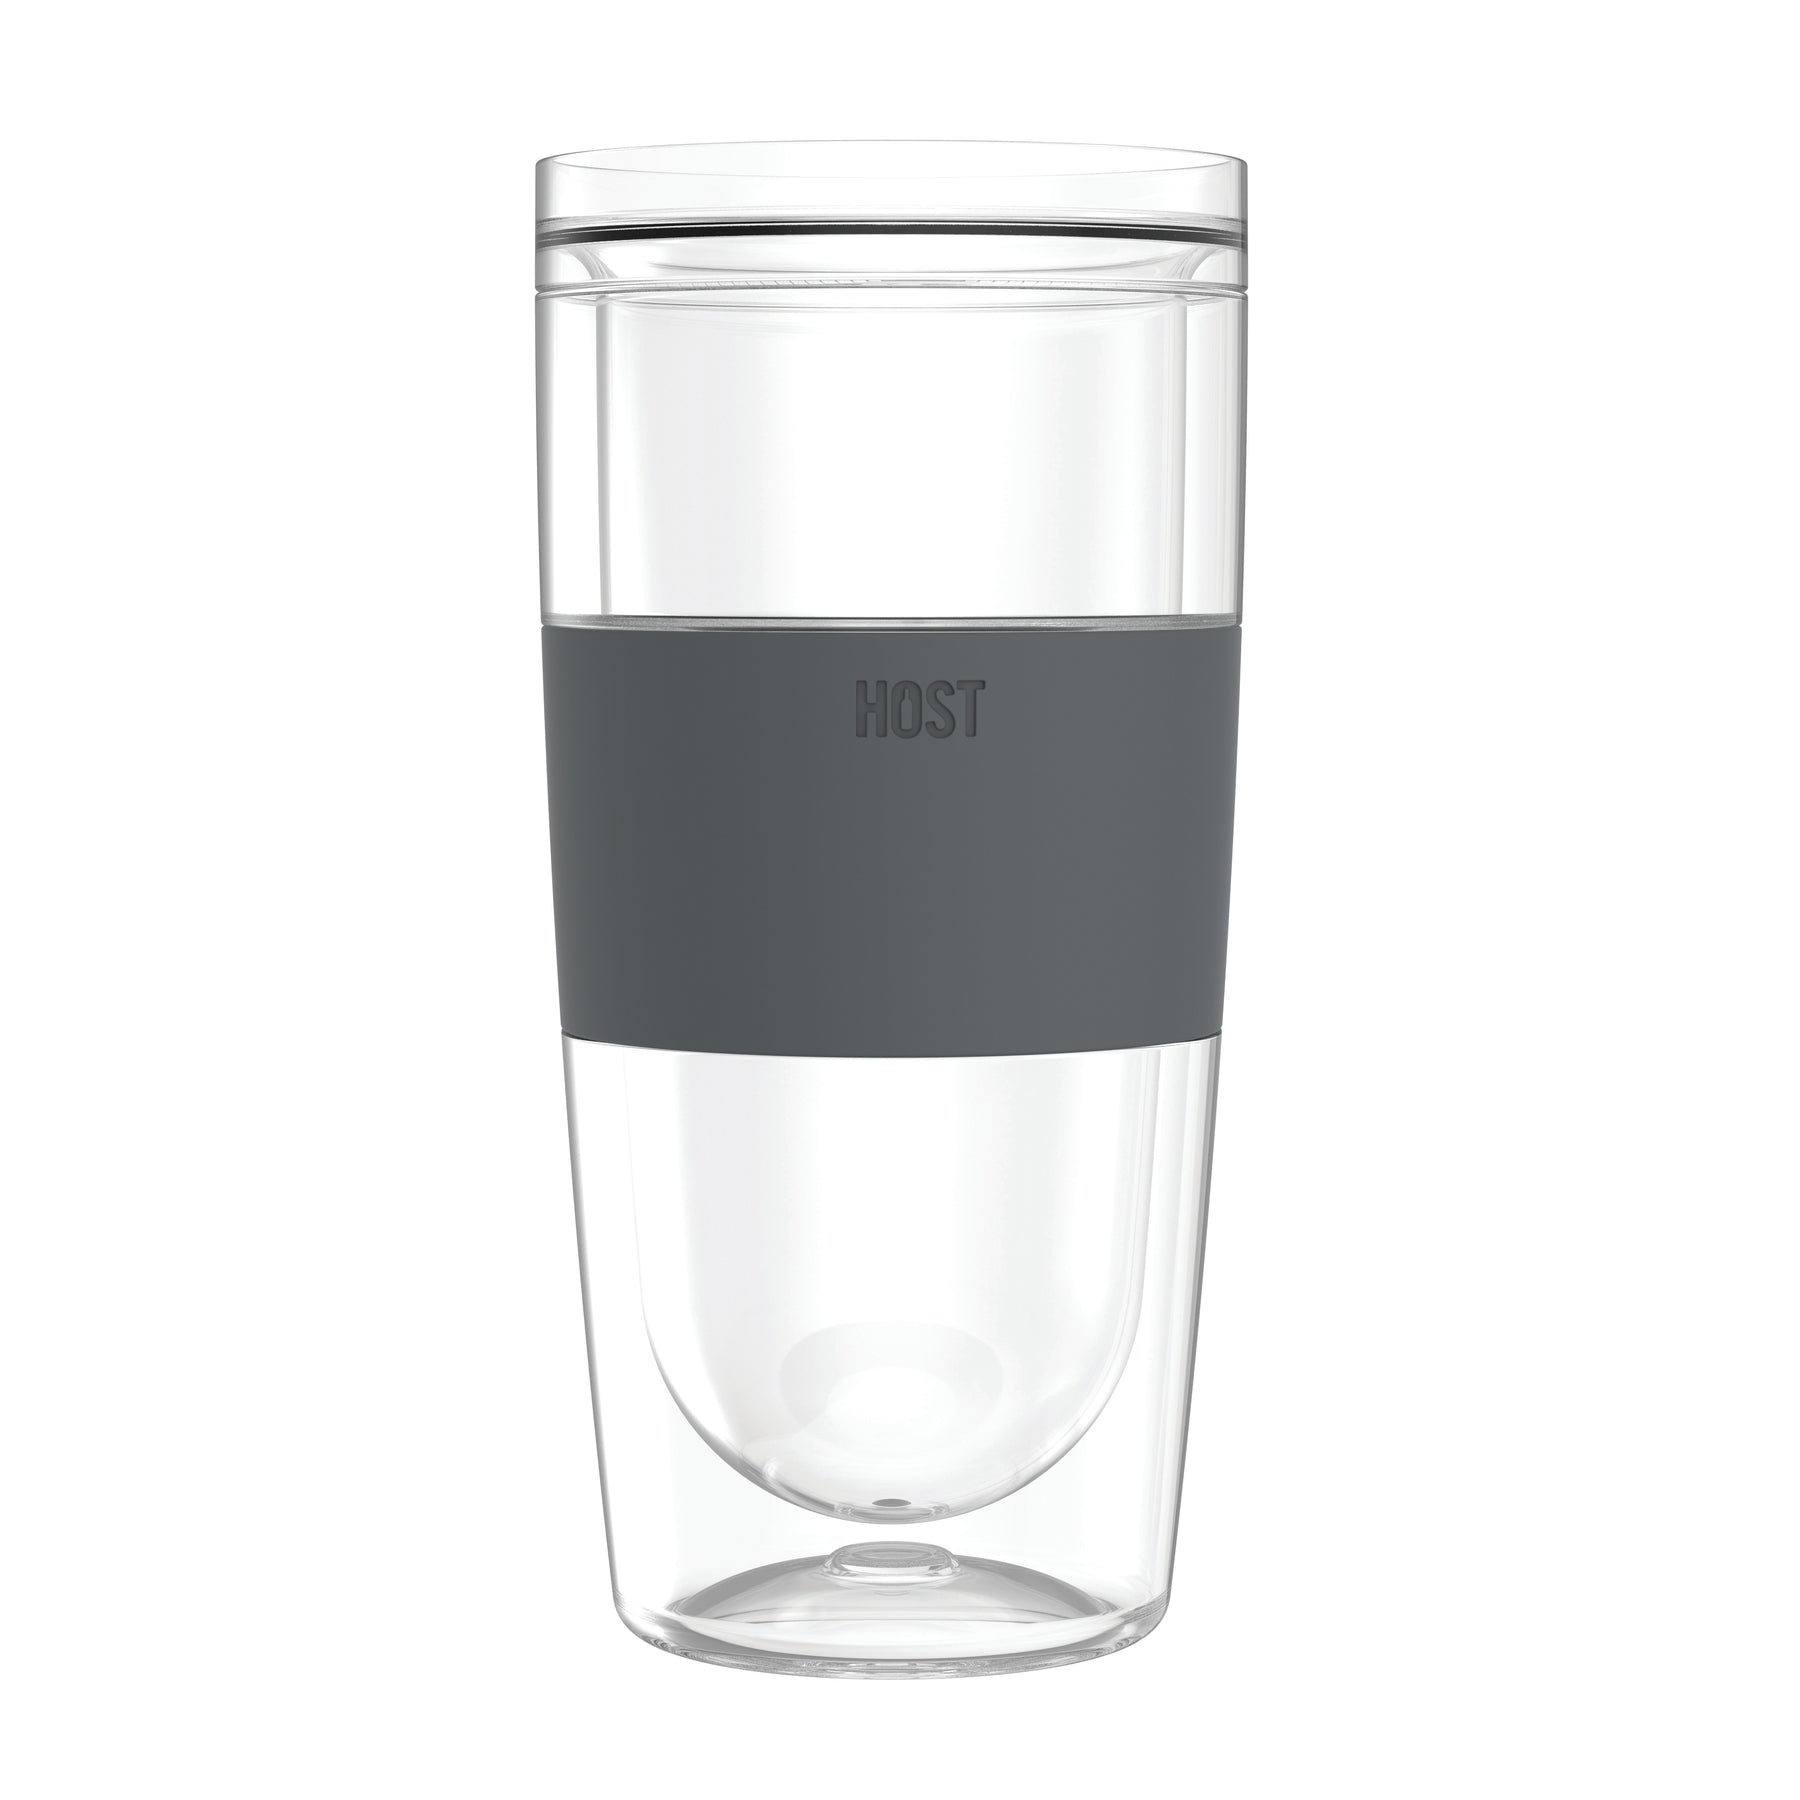 HOST Straw and Lid Plastic Double Wall Insulated Freezable Drink Chilling  Tumbler Glasses, 16 oz, Grey